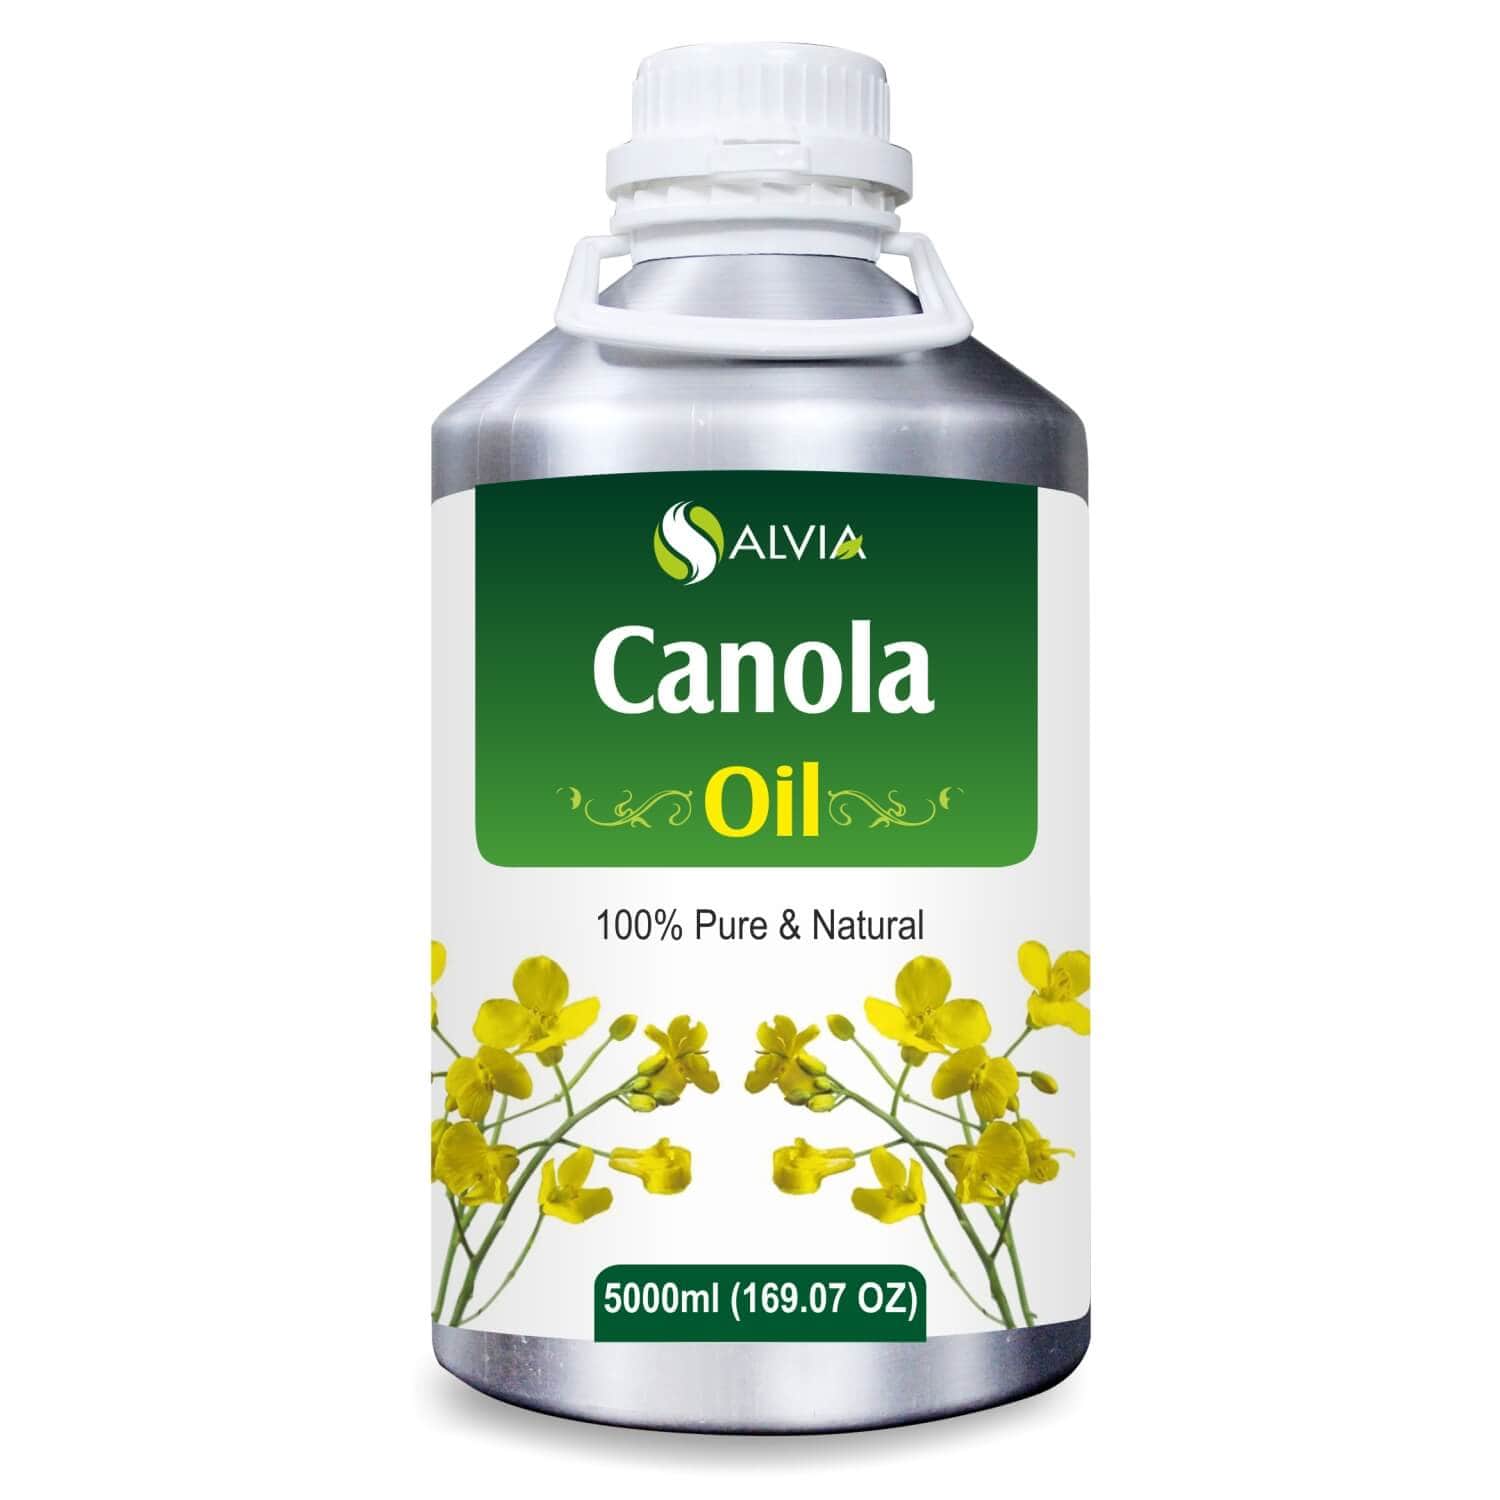 Salvia Natural Carrier Oils 5000ml Canola Oil ( Brassica napus)100% Natural Pure Carrier Oil